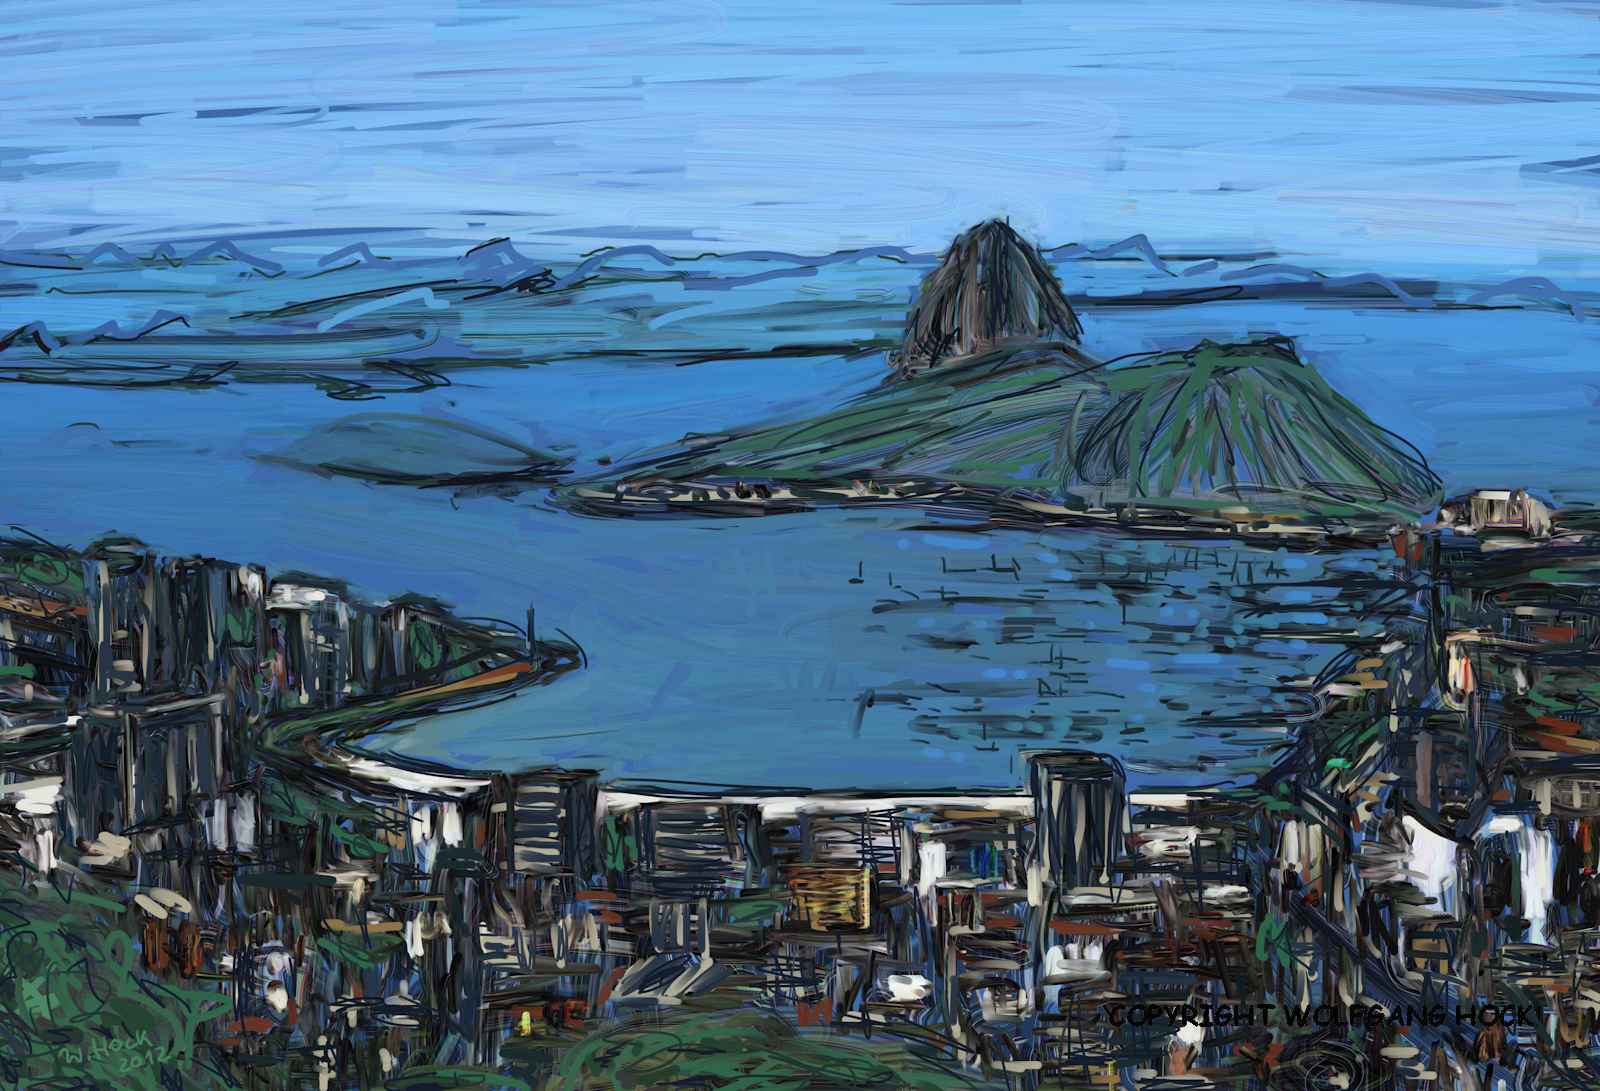 Rio de Janeiro in the darkness 2012   Inkjet printed computer painting on canvas, edition of 5 125 x 85 cm (68 megapixel)